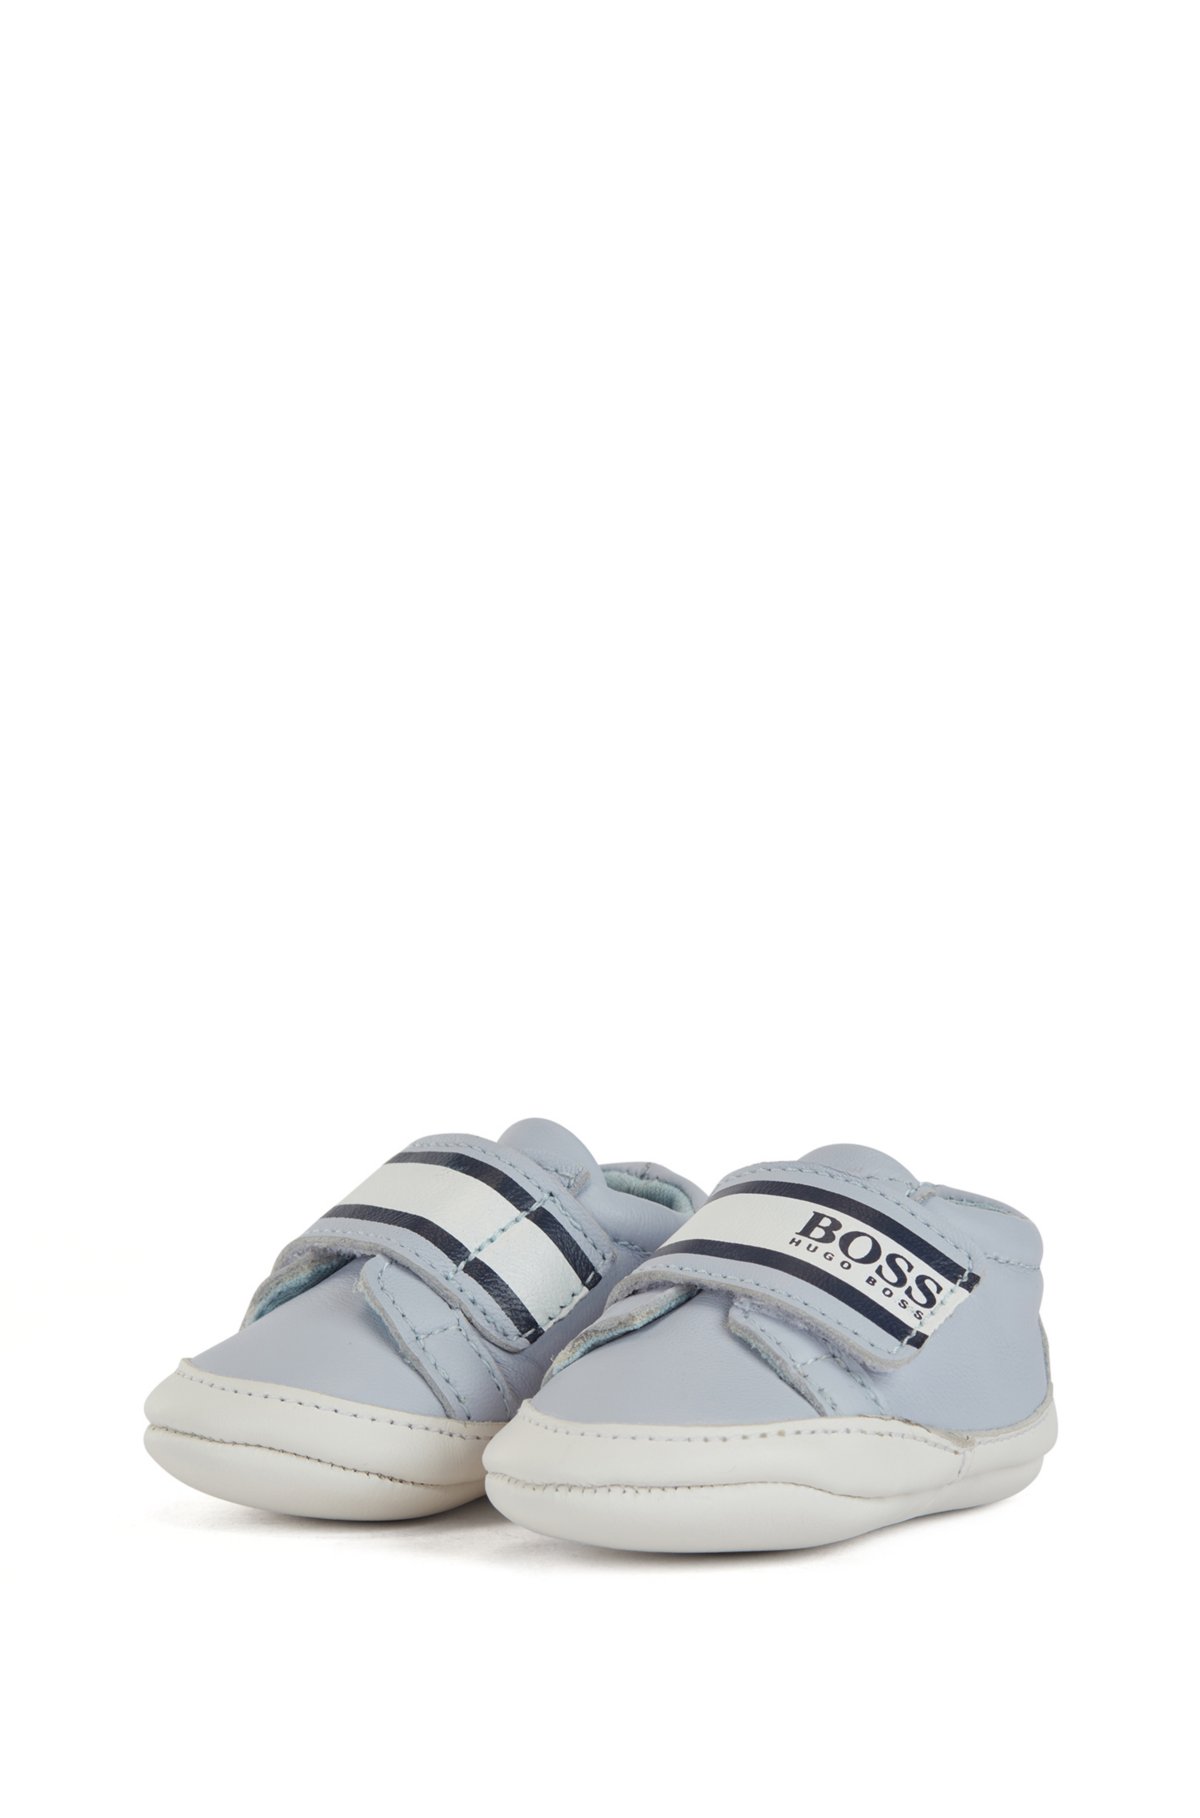 Pris Revolutionerende kurve BOSS - Baby slippers in leather with logo touch-fastening